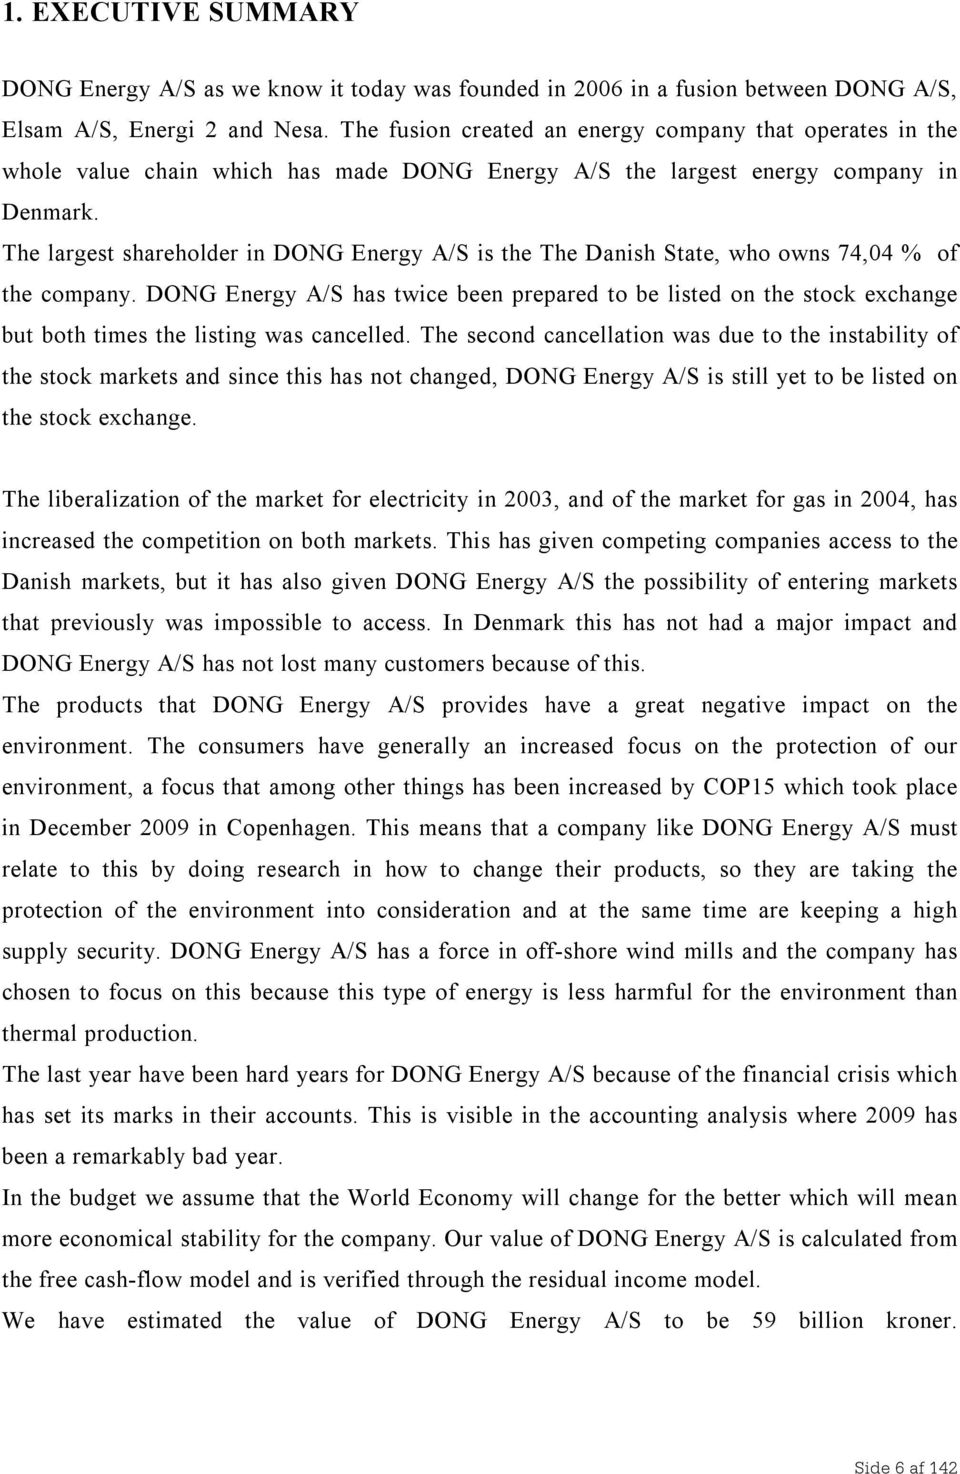 The largest shareholder in DONG Energy A/S is the The Danish State, who owns 74,04 % of the company.